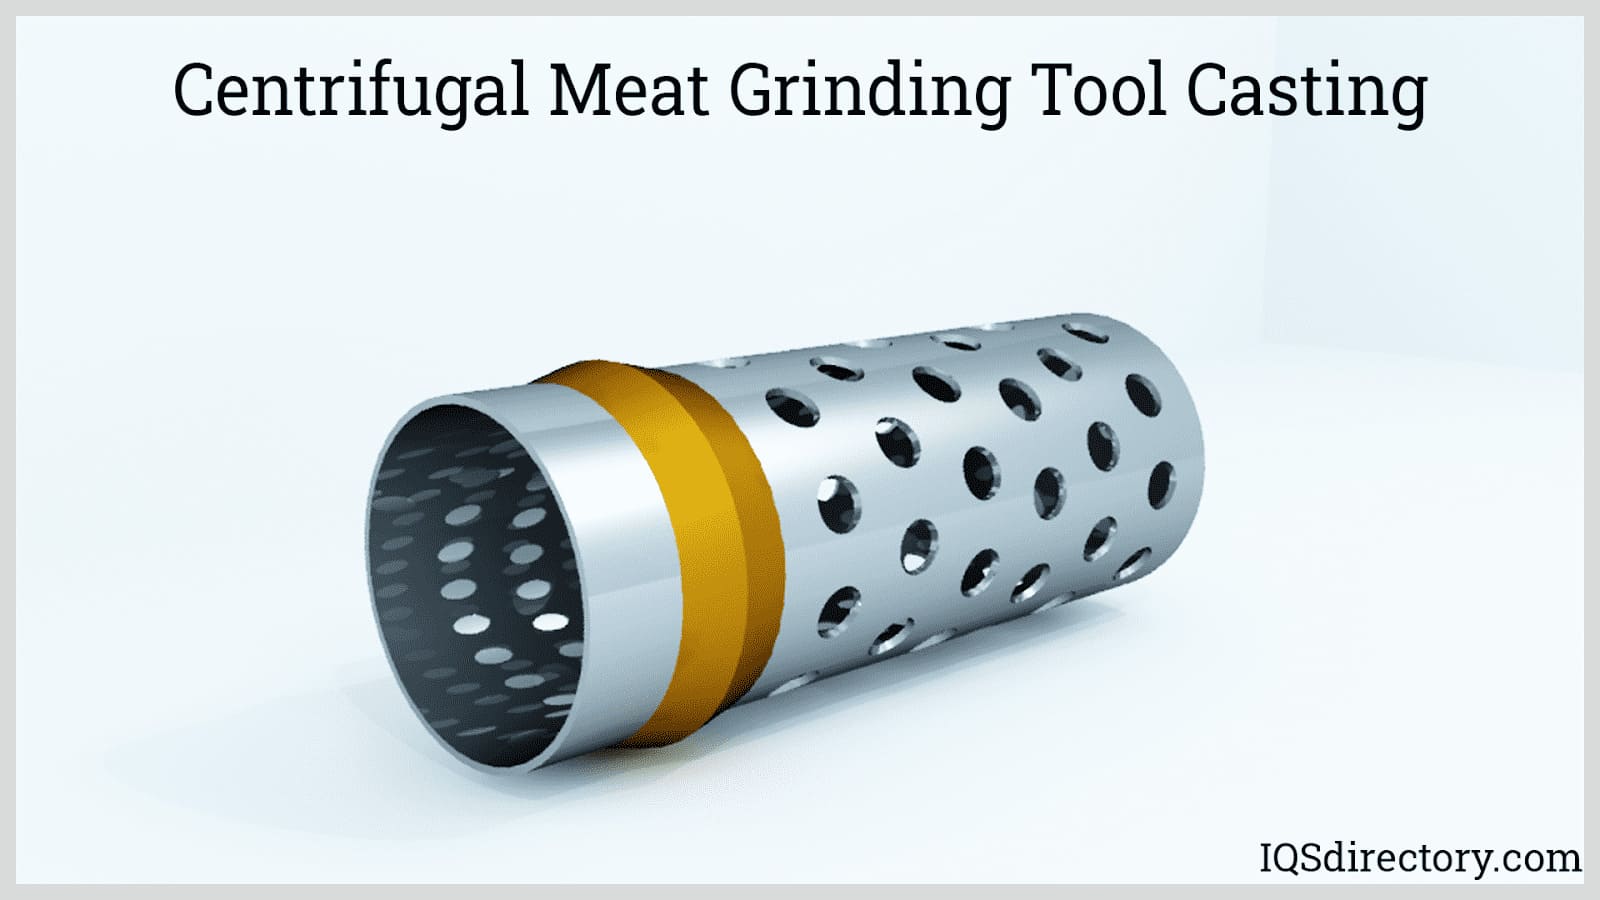 Centrifugal Meat Grinding Tool Casting